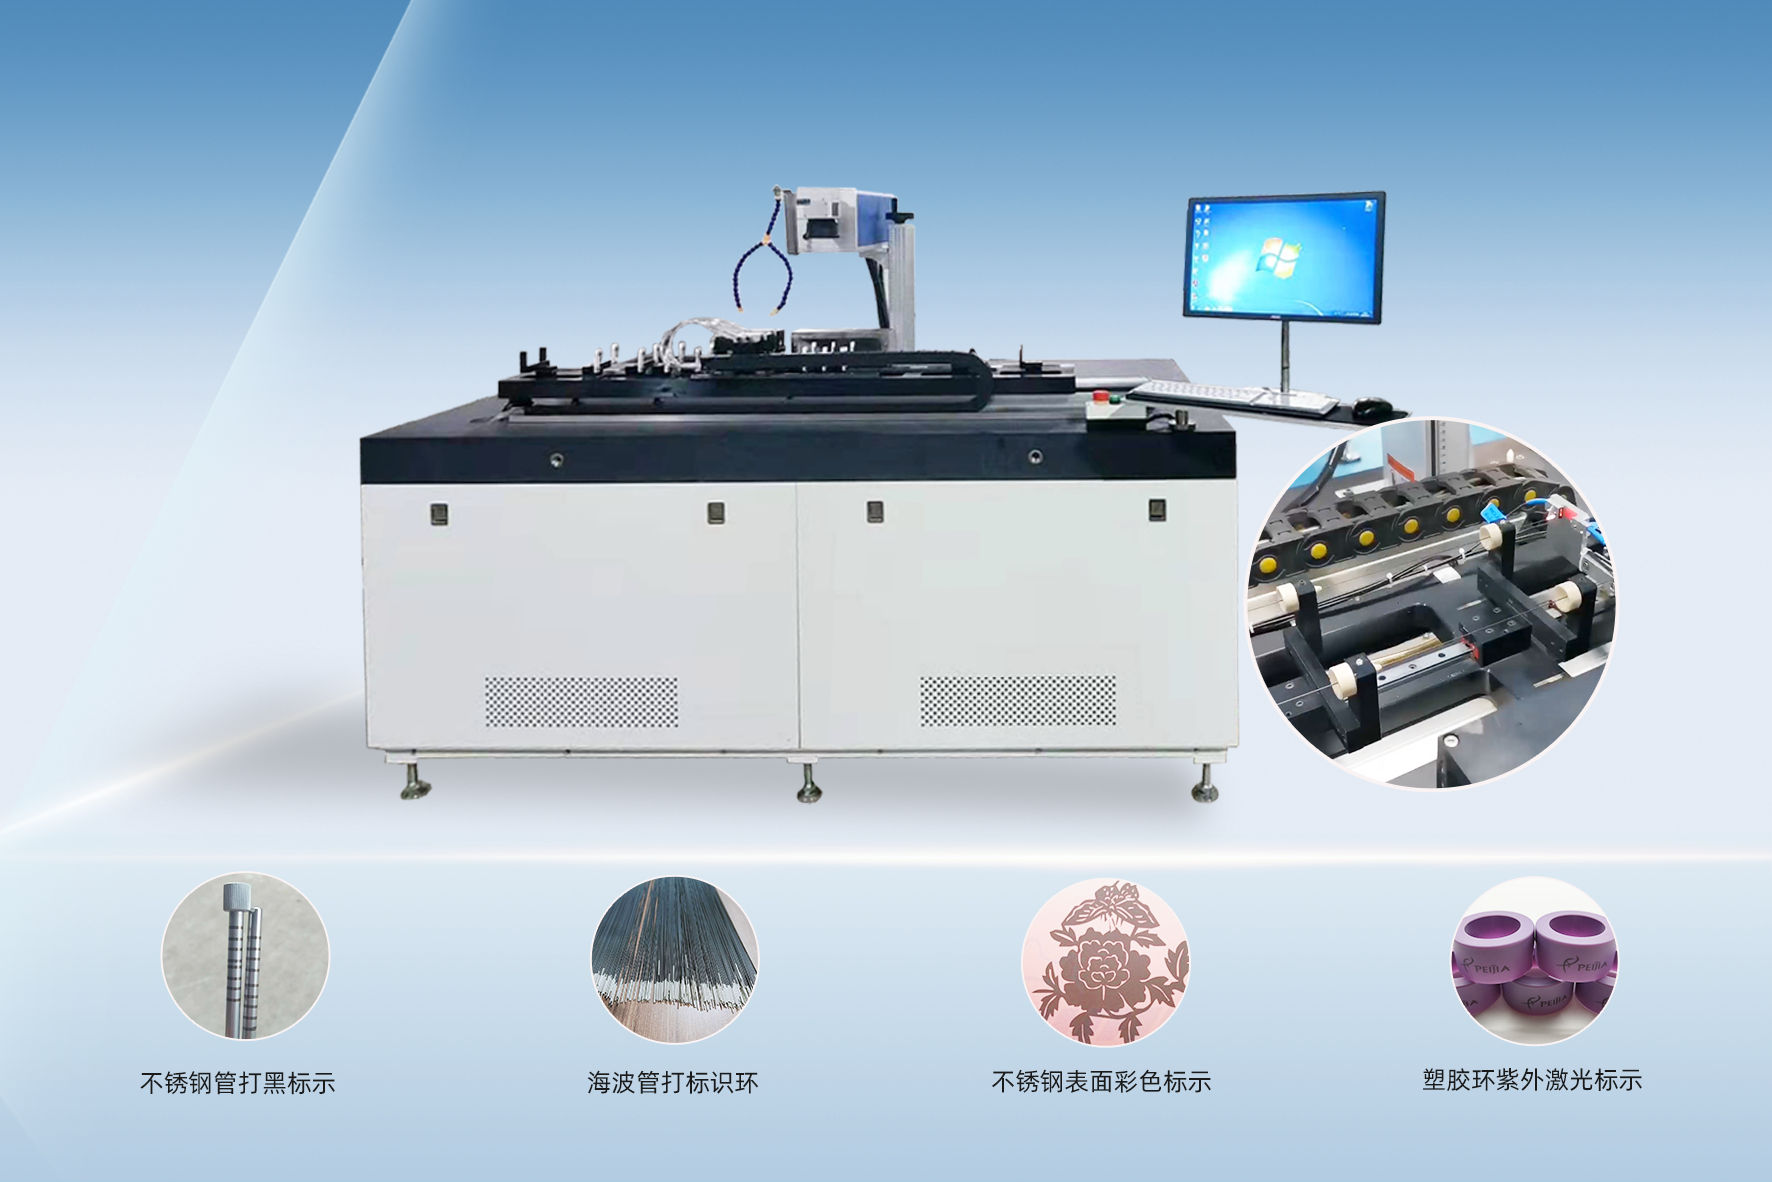 What is the difference between UV laser marking machine and fiber laser marking machine, and what are their respective advantages?